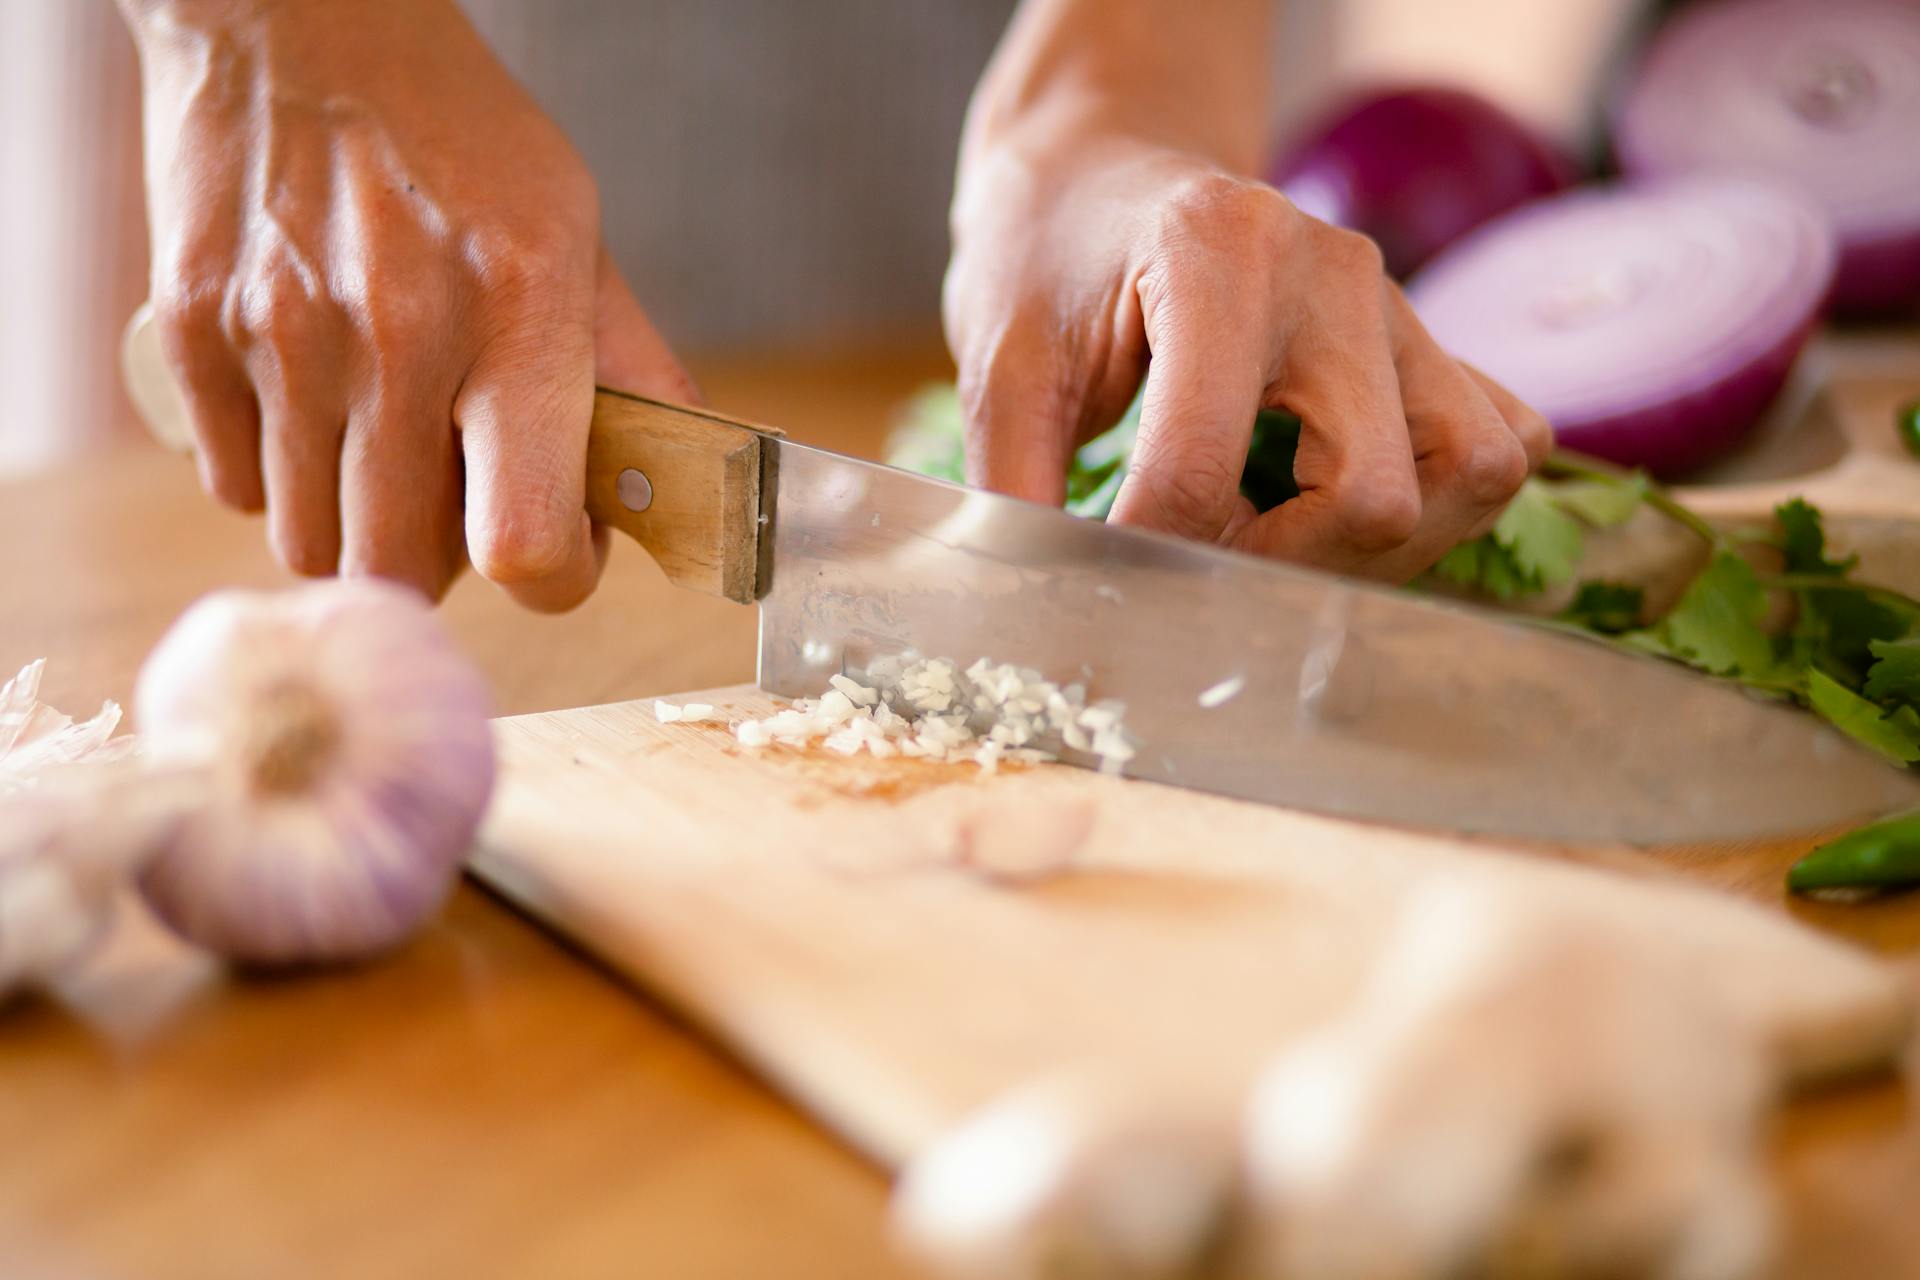 A person chopping vegetables | Source: Pexels